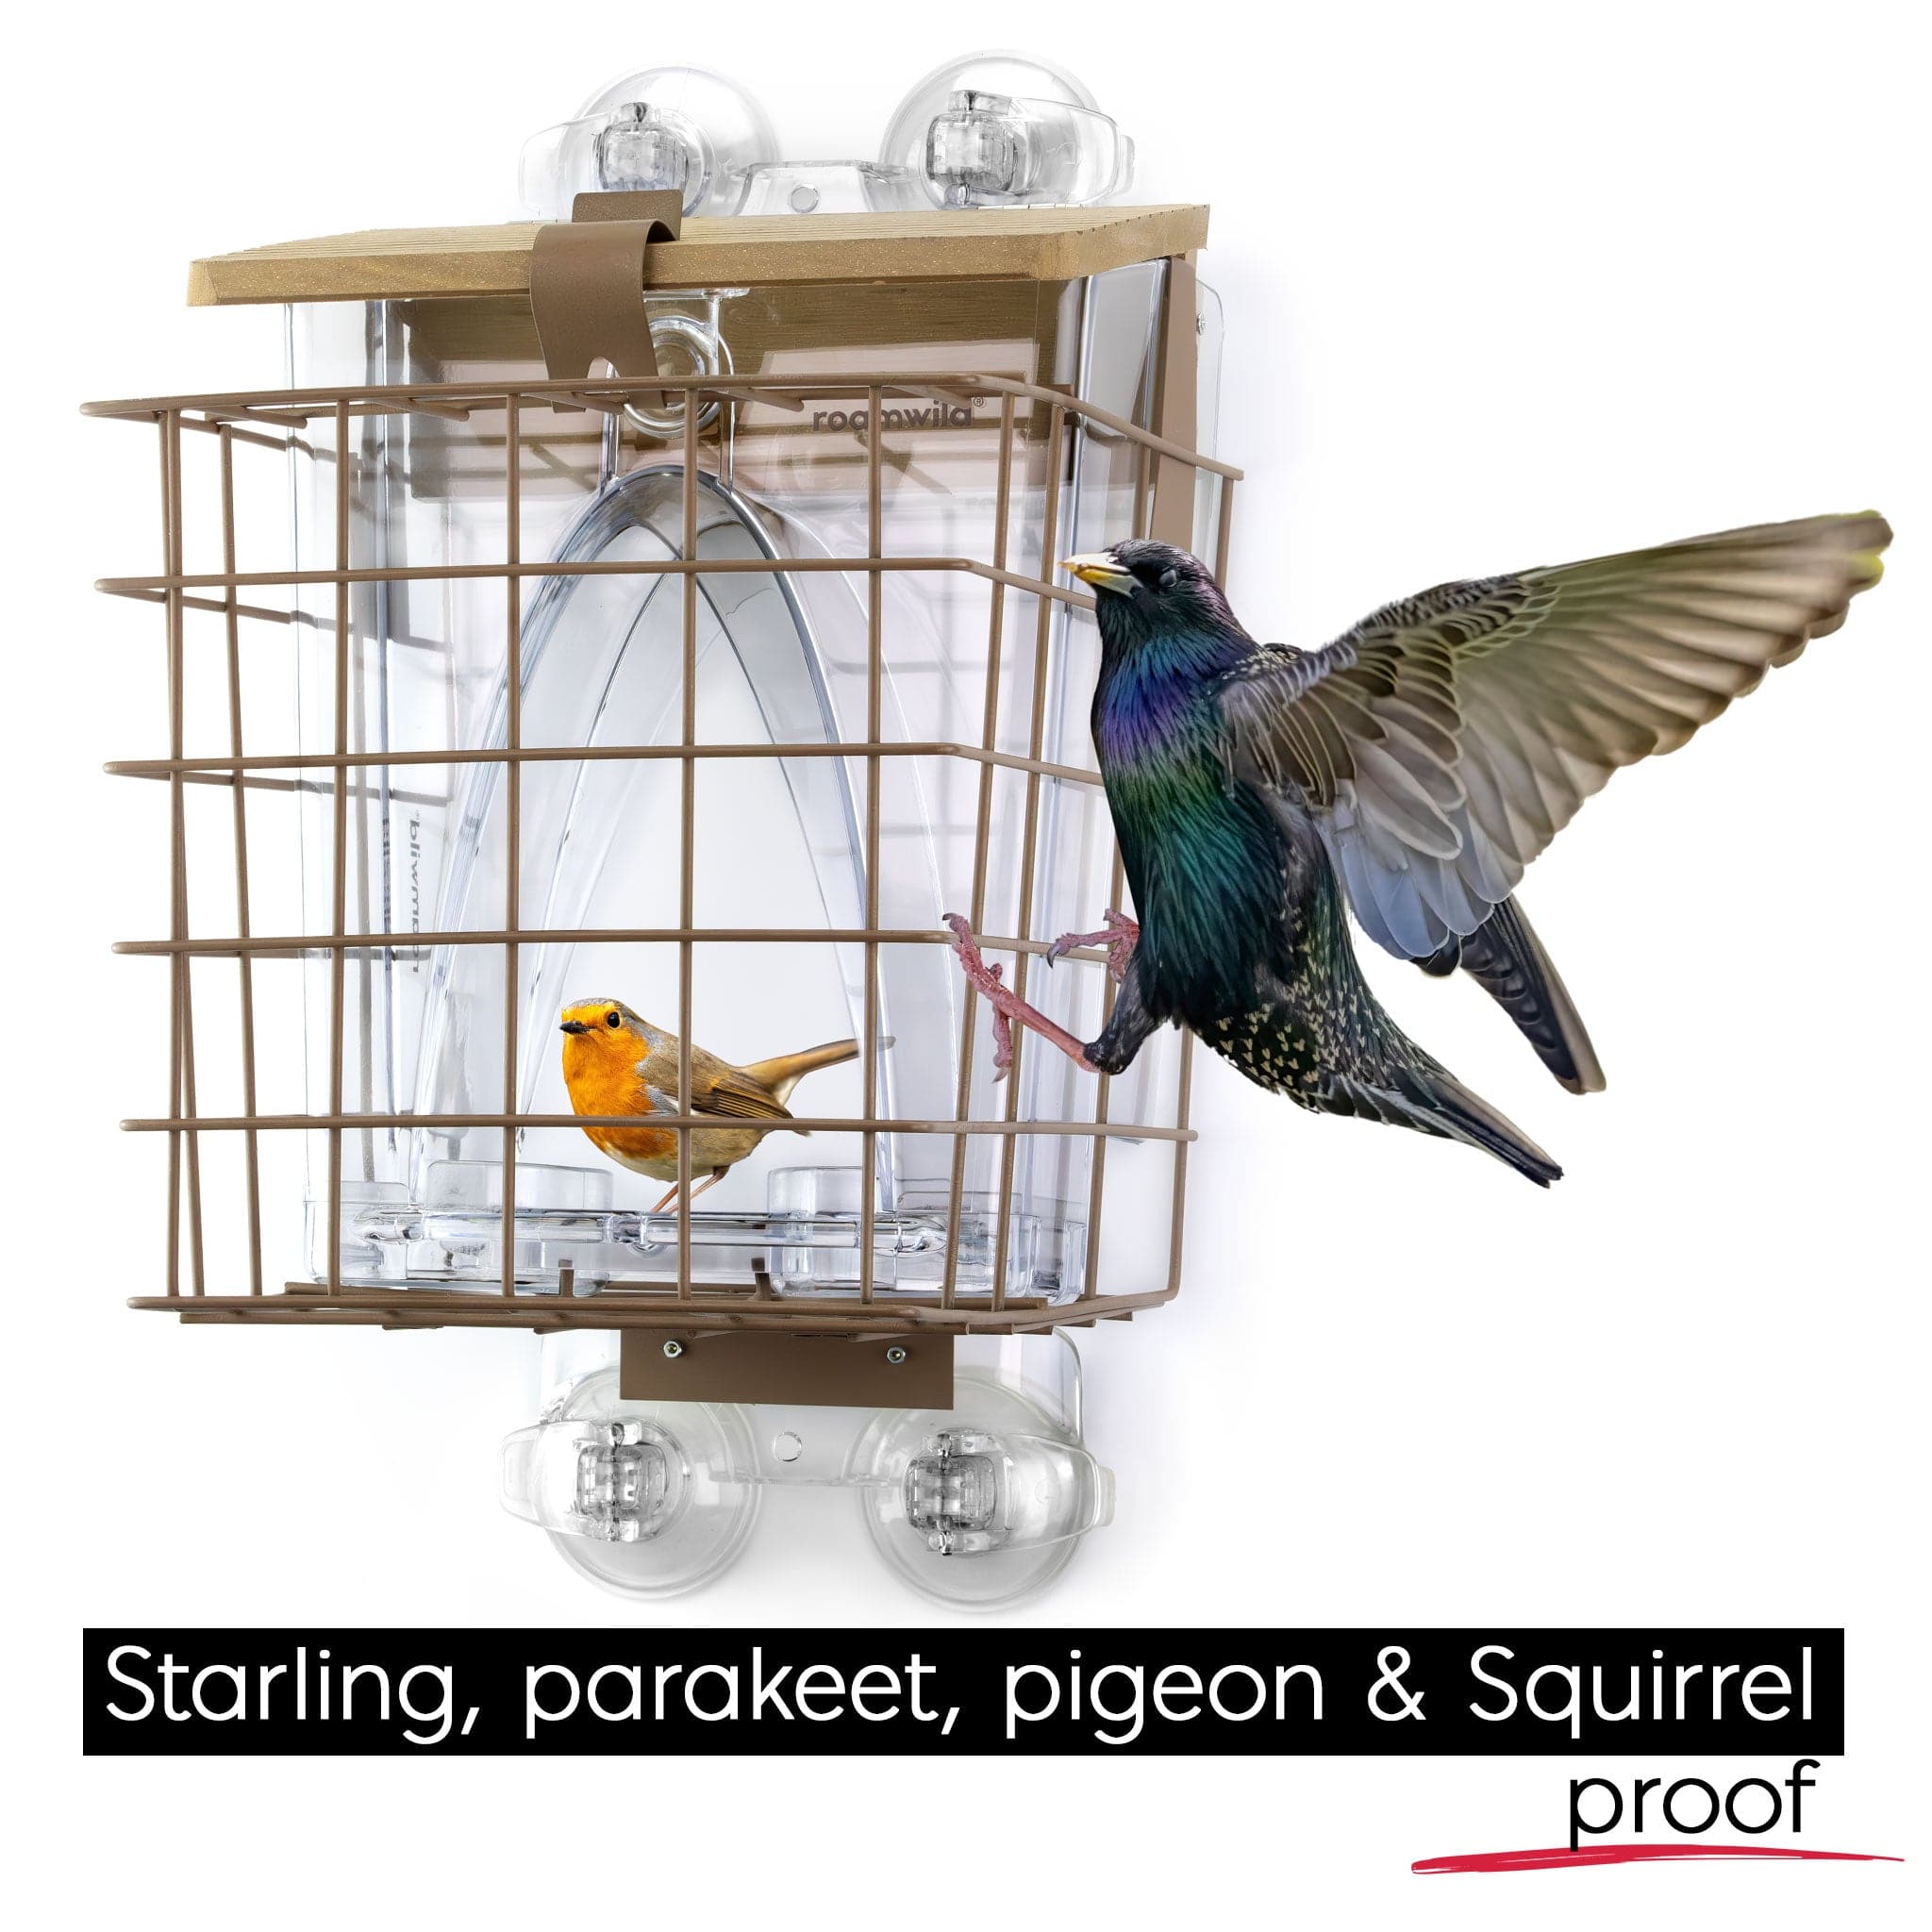 Roamwild Arch Window Feeder: Squirrel Proof Cage Accessory